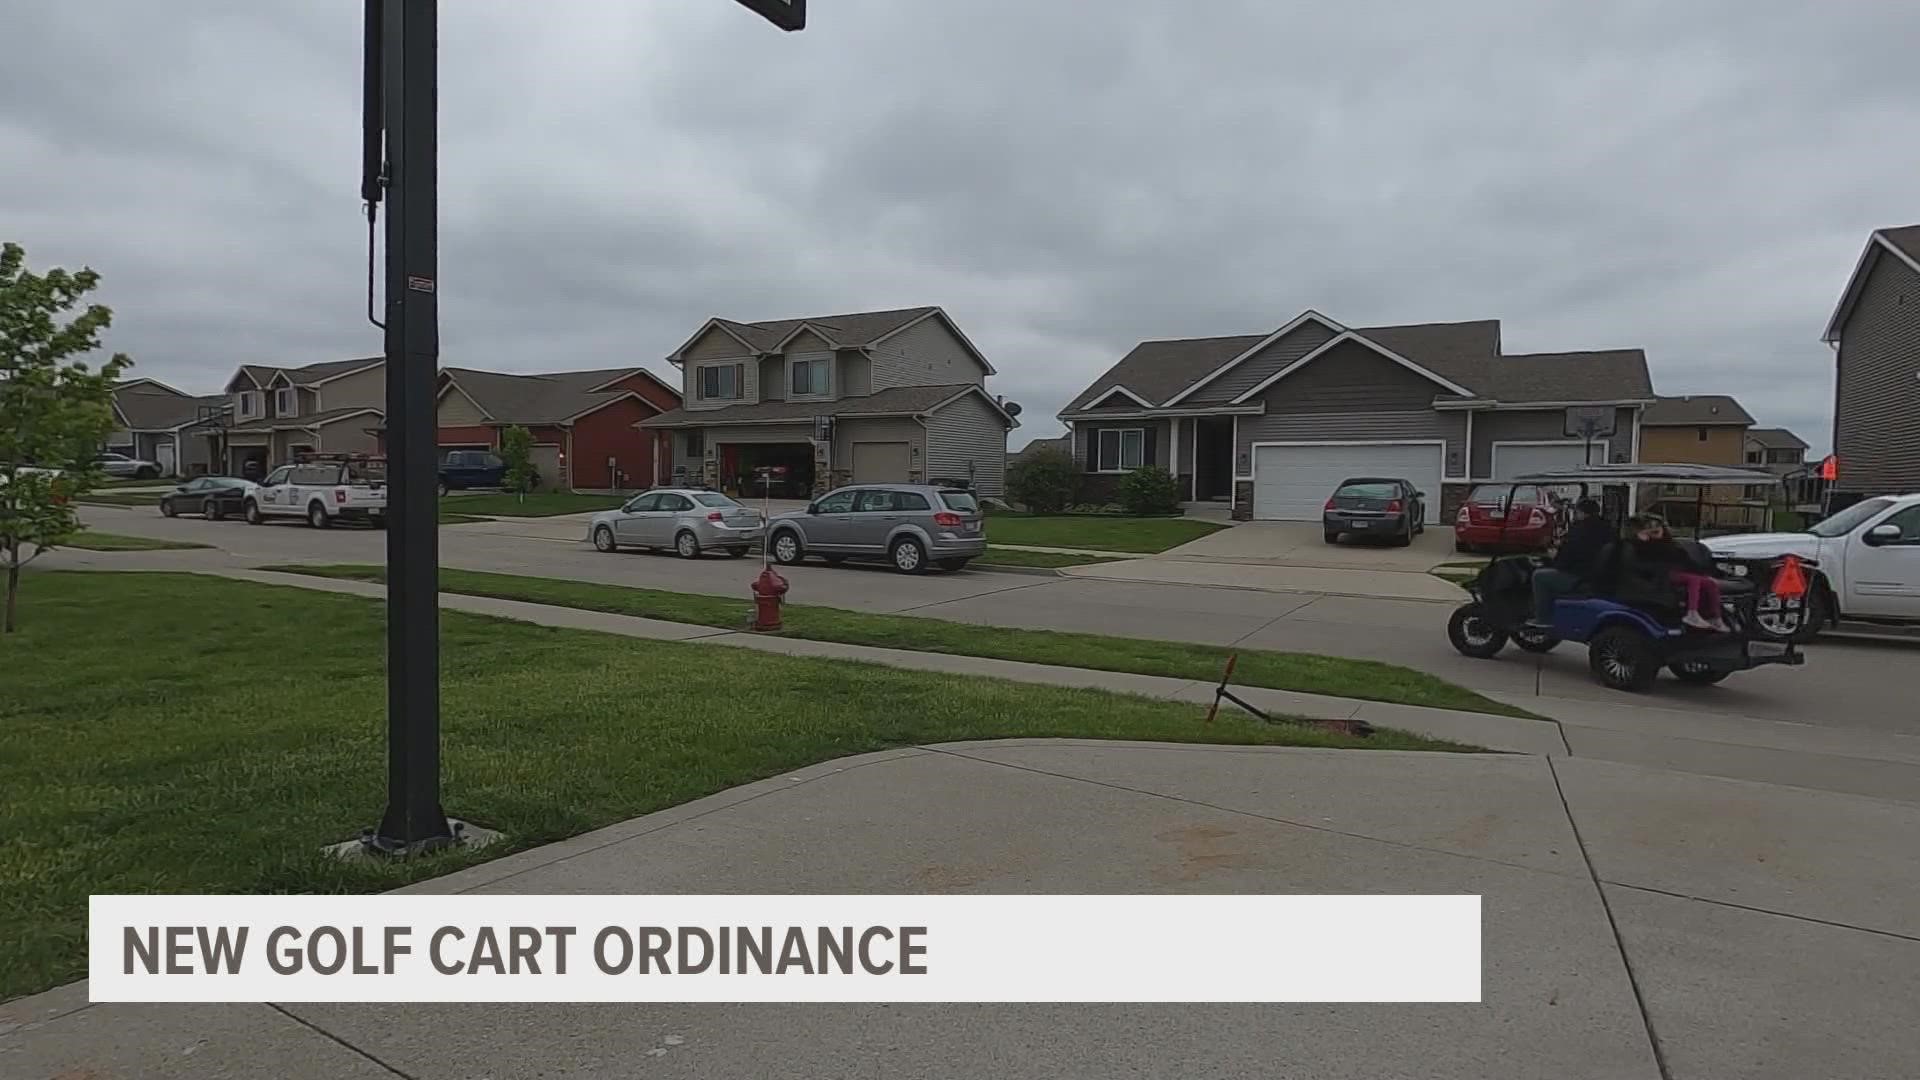 The city of Bondurant allows residents to drive on certain streets with golf carts under a new ordinance passed earlier this month.